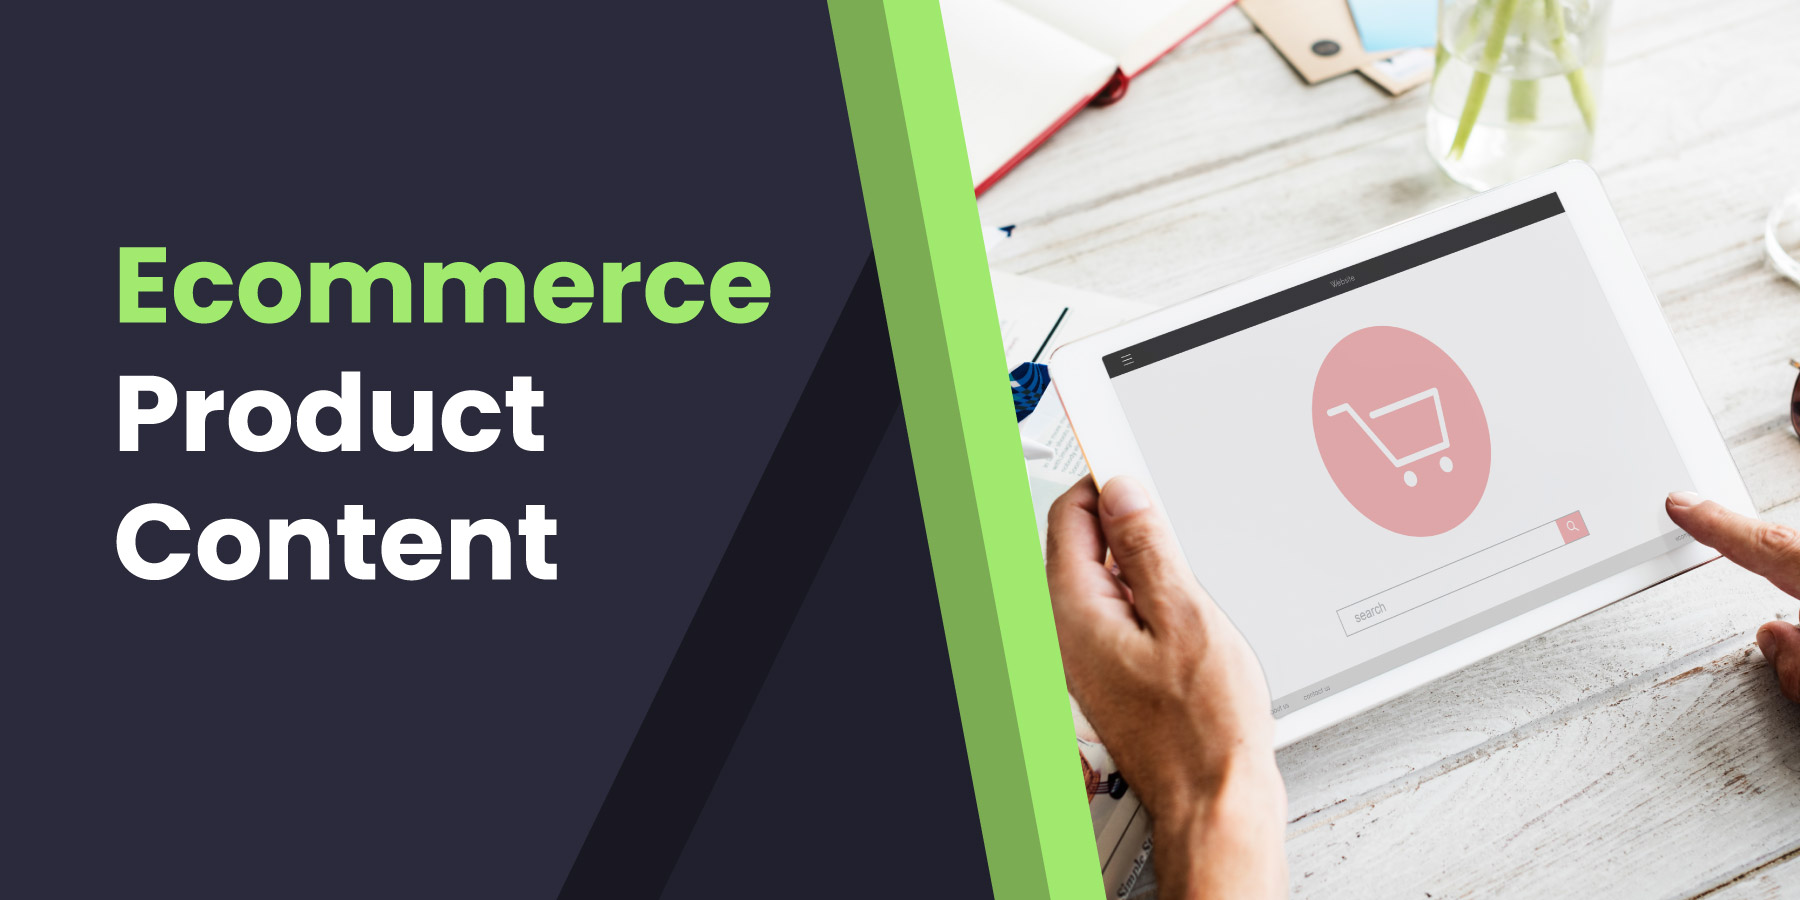 Ecommerce Product Content